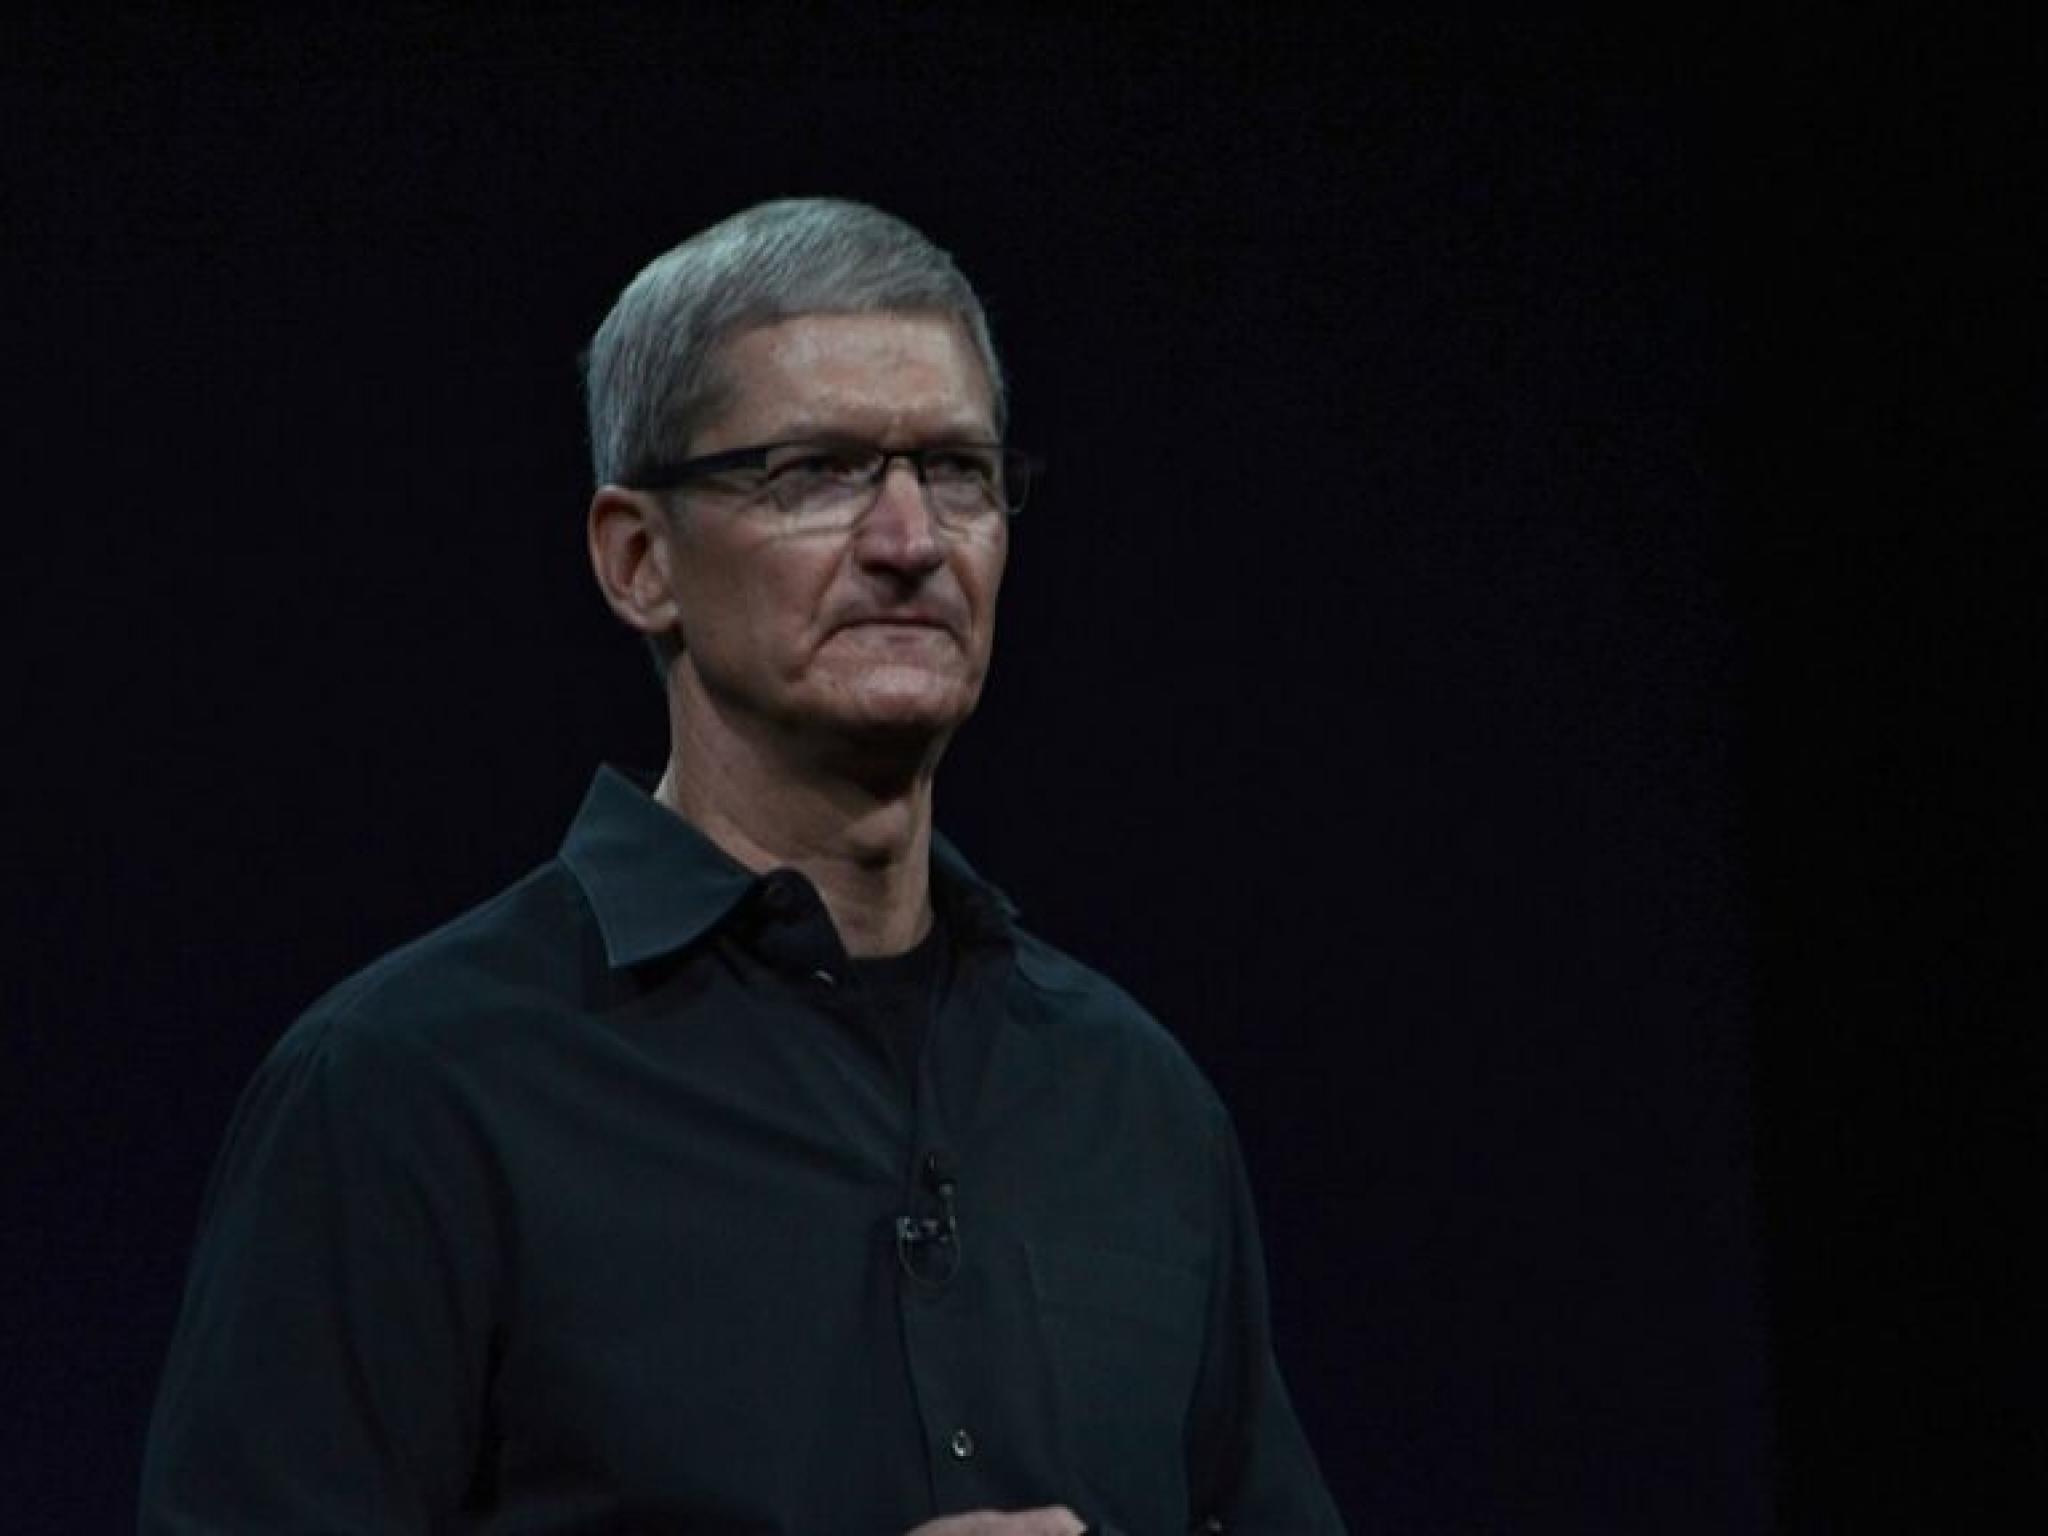  tim-cook-has-his-task-cut-out-ahead-of-wwdc-expert-says-apple-needs-to-show-the-vision-ahead-saying-we-know 